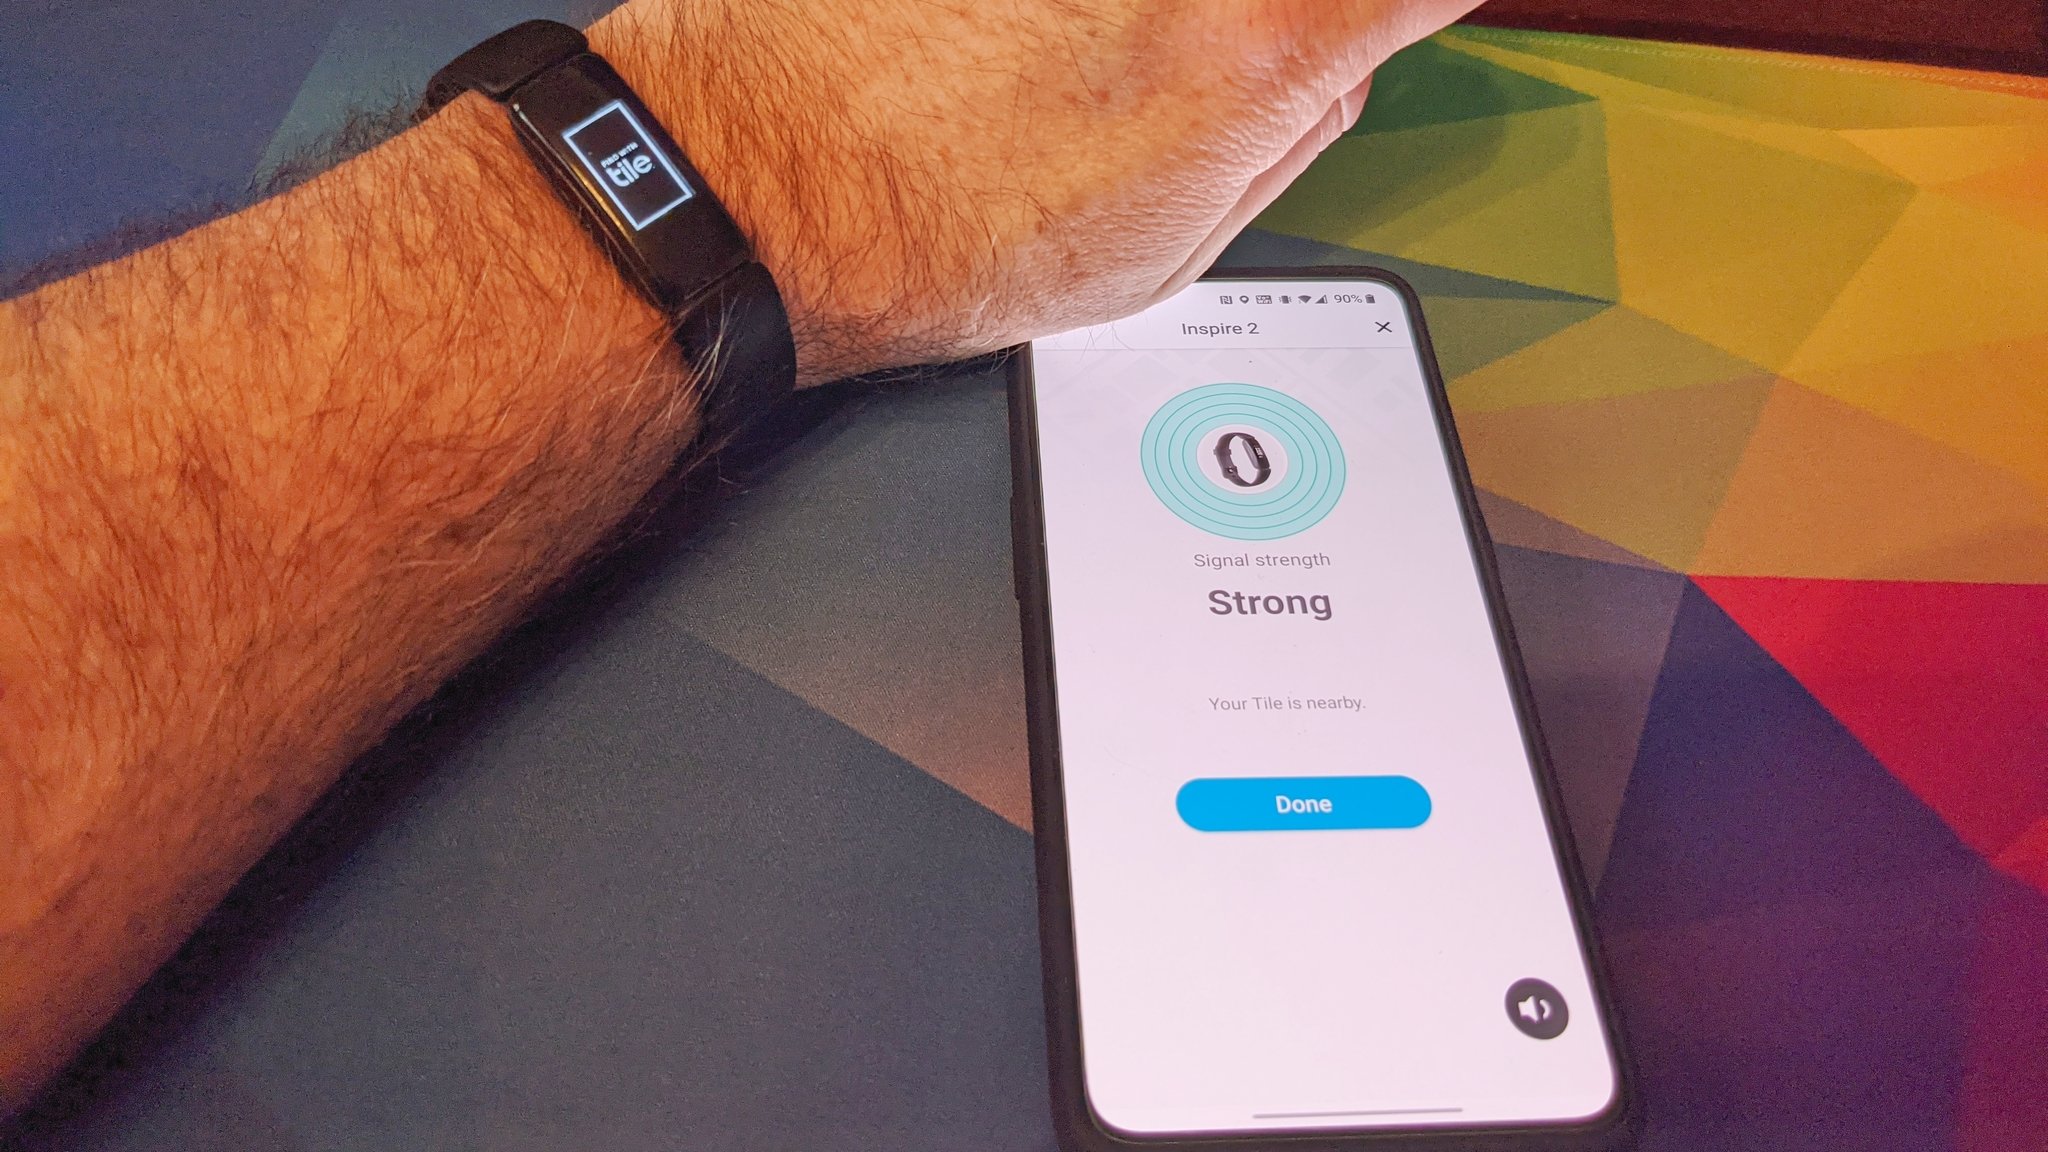 Tile App Integration: Understanding The Purpose Of The Tile App For Fitbit